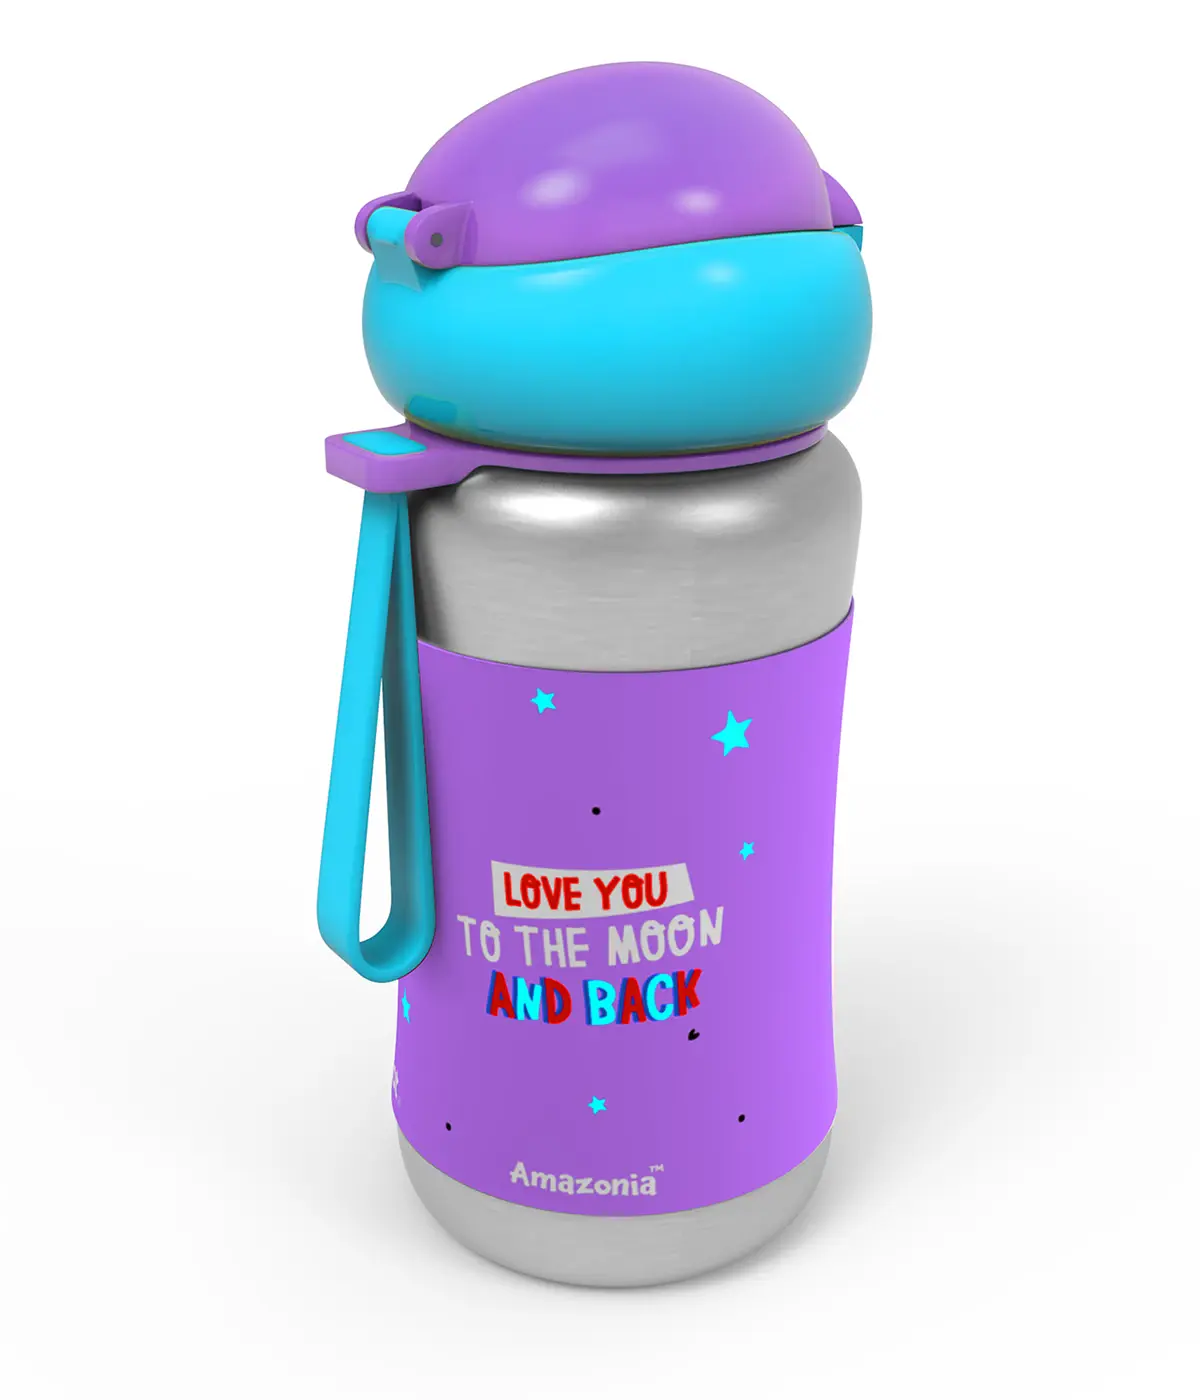 Rabitat Steel Play Sports Stainless Steel Sipper Bottle Love You to the Moon 350 ml For Kids of Age 3Y+, Multicolour